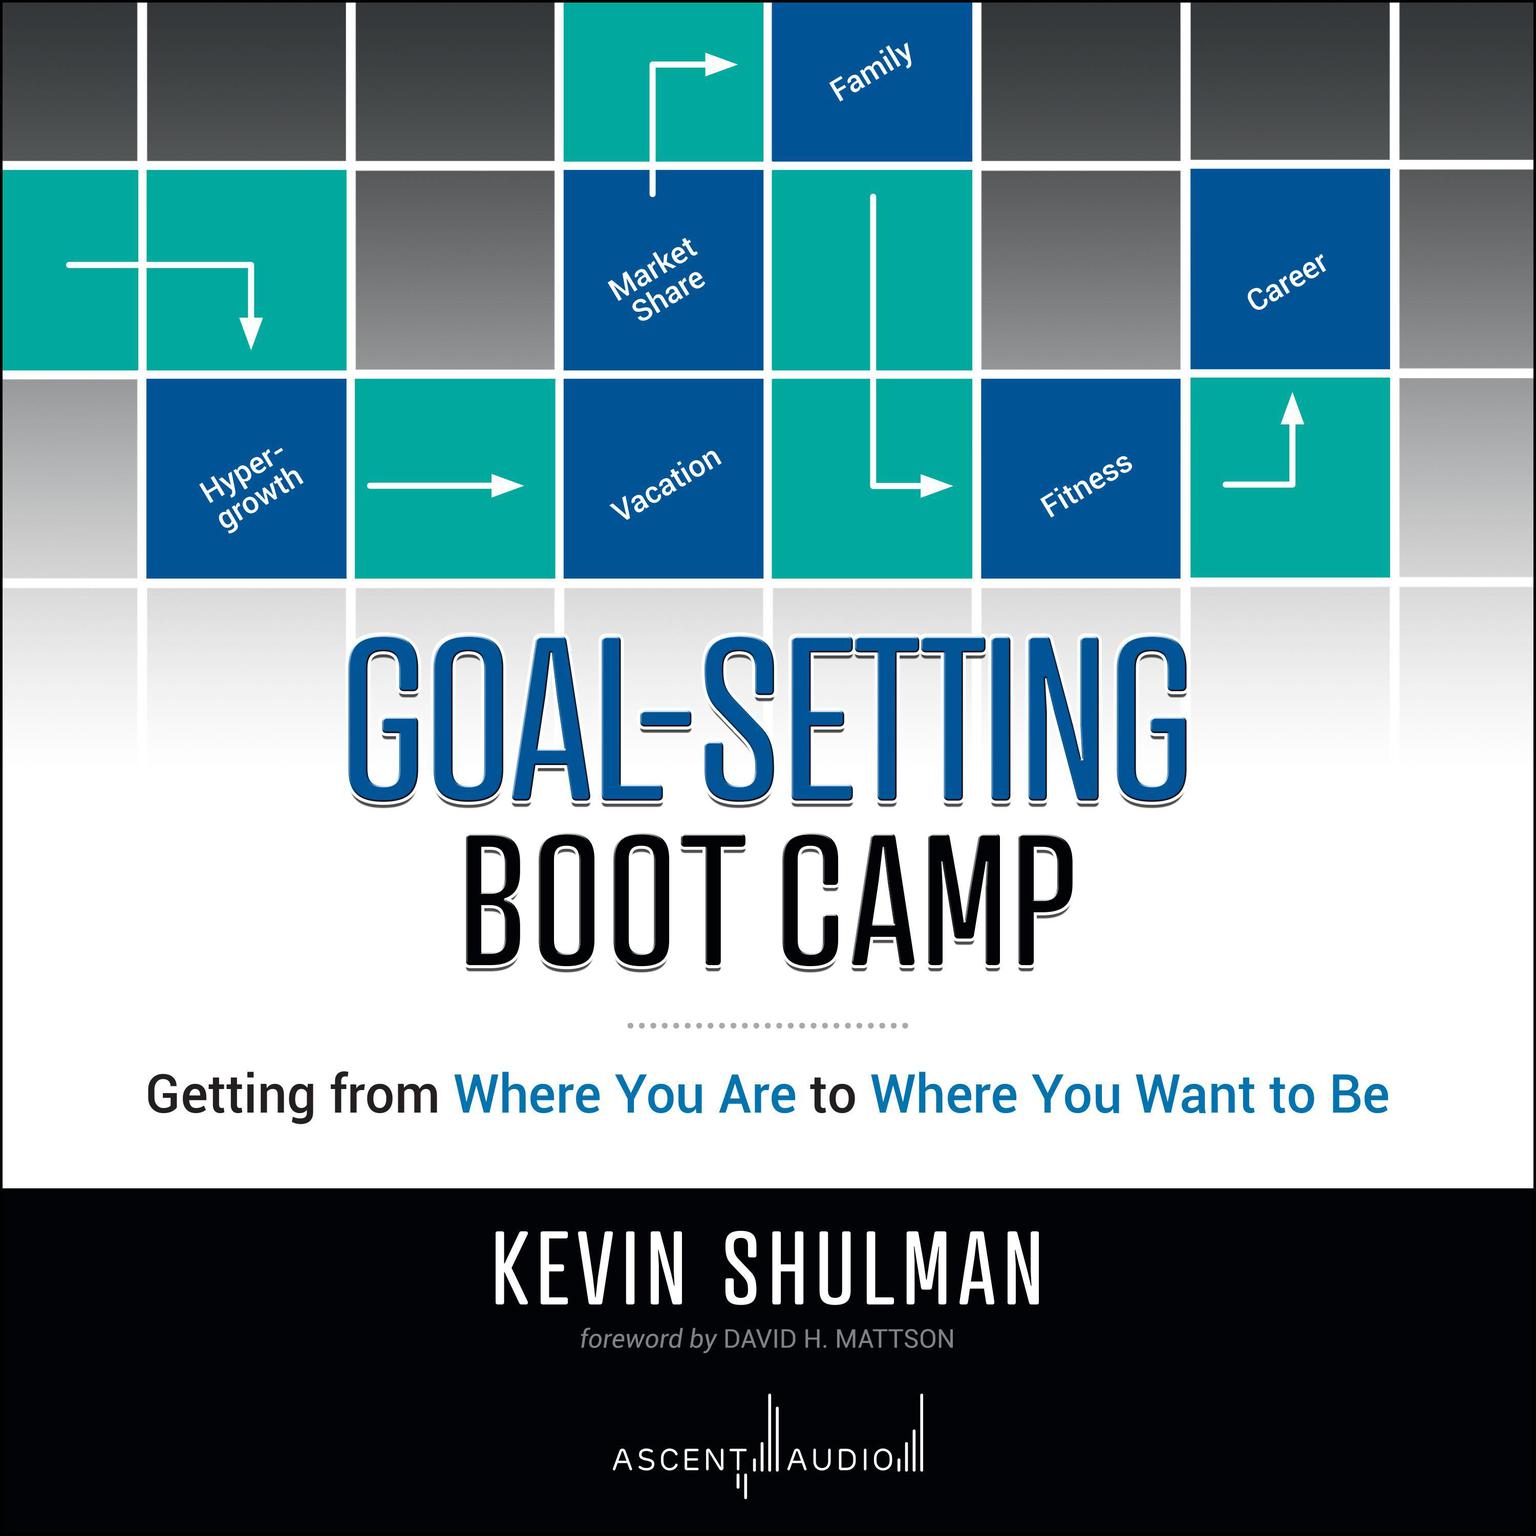 Goal-Setting Boot Camp: Getting from Where You Are to Where You Want to Be Audiobook, by Kevin Shulman